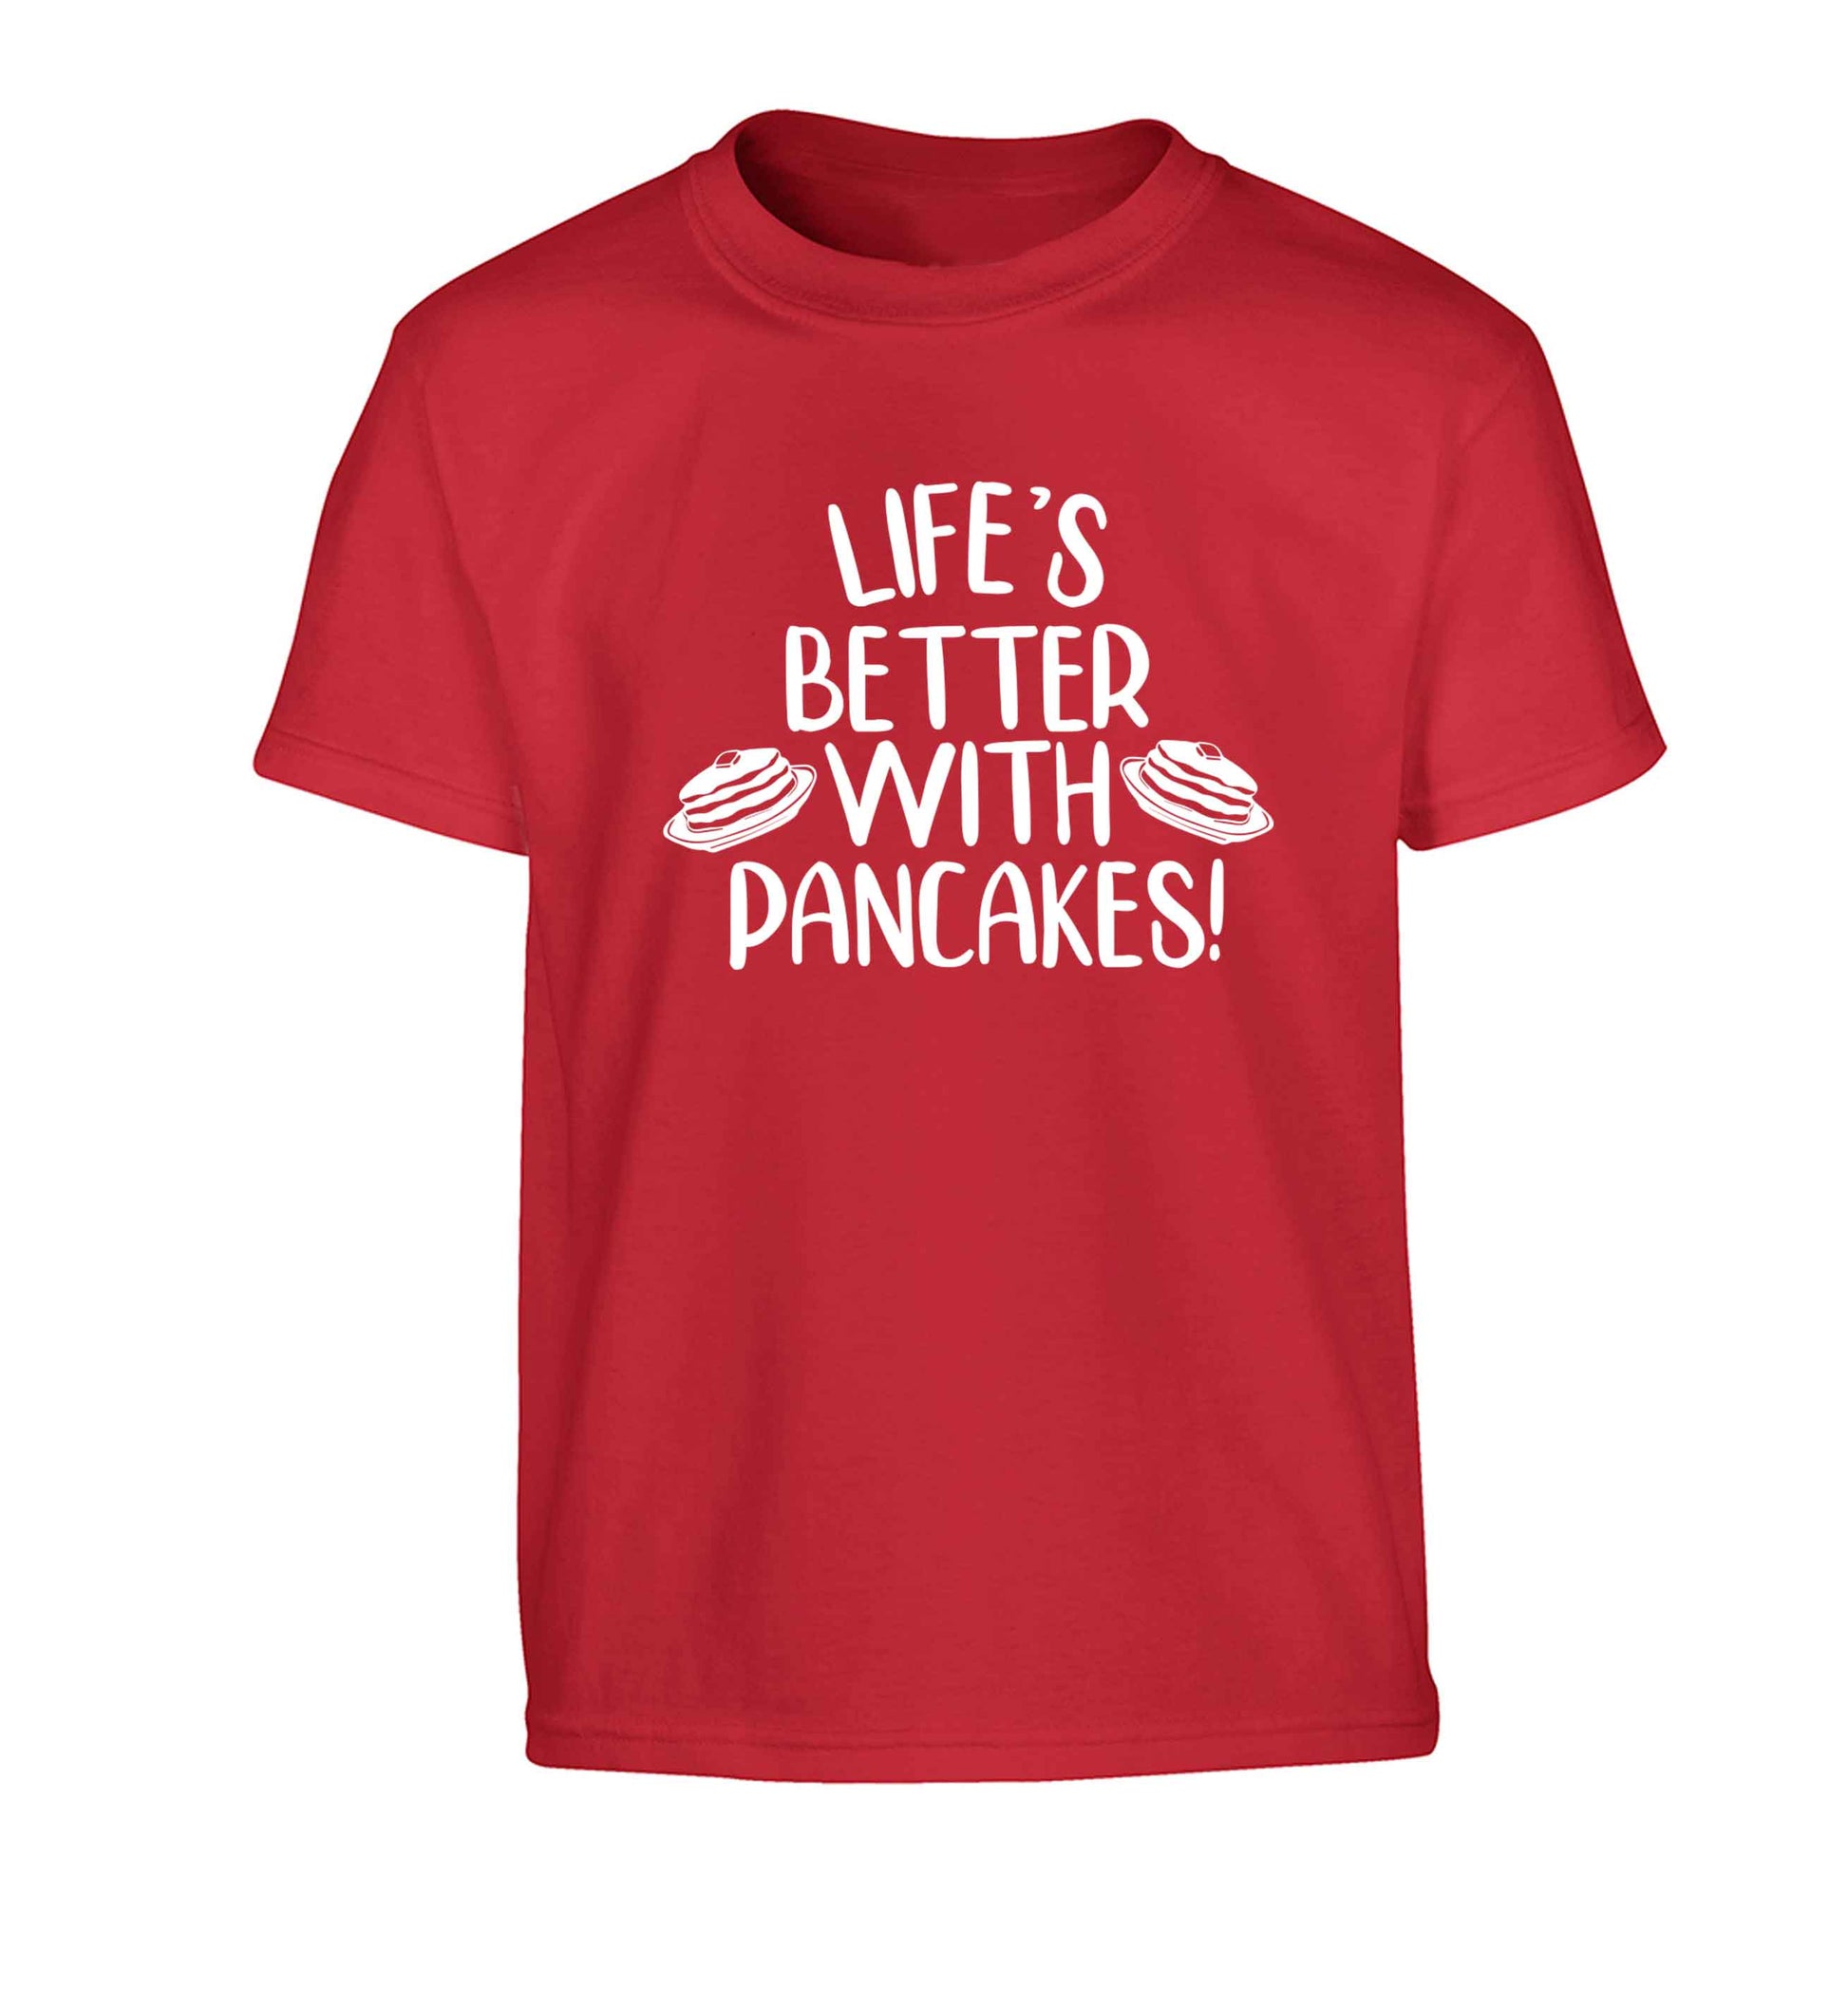 Life's better with pancakes Children's red Tshirt 12-13 Years